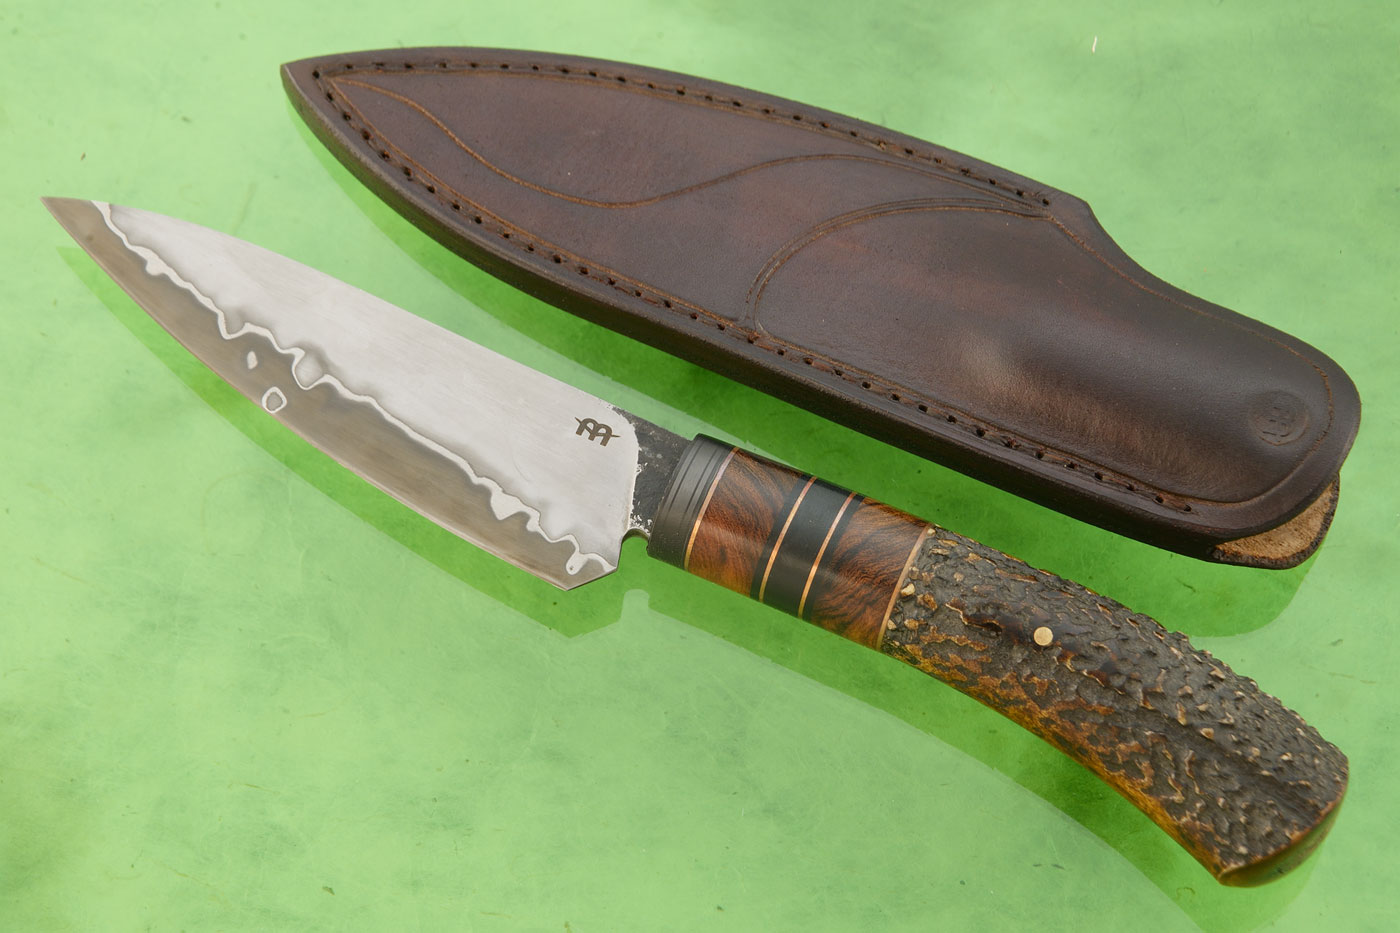 Utilitarian: San Mai Belt Knife with Ironwood and Stag